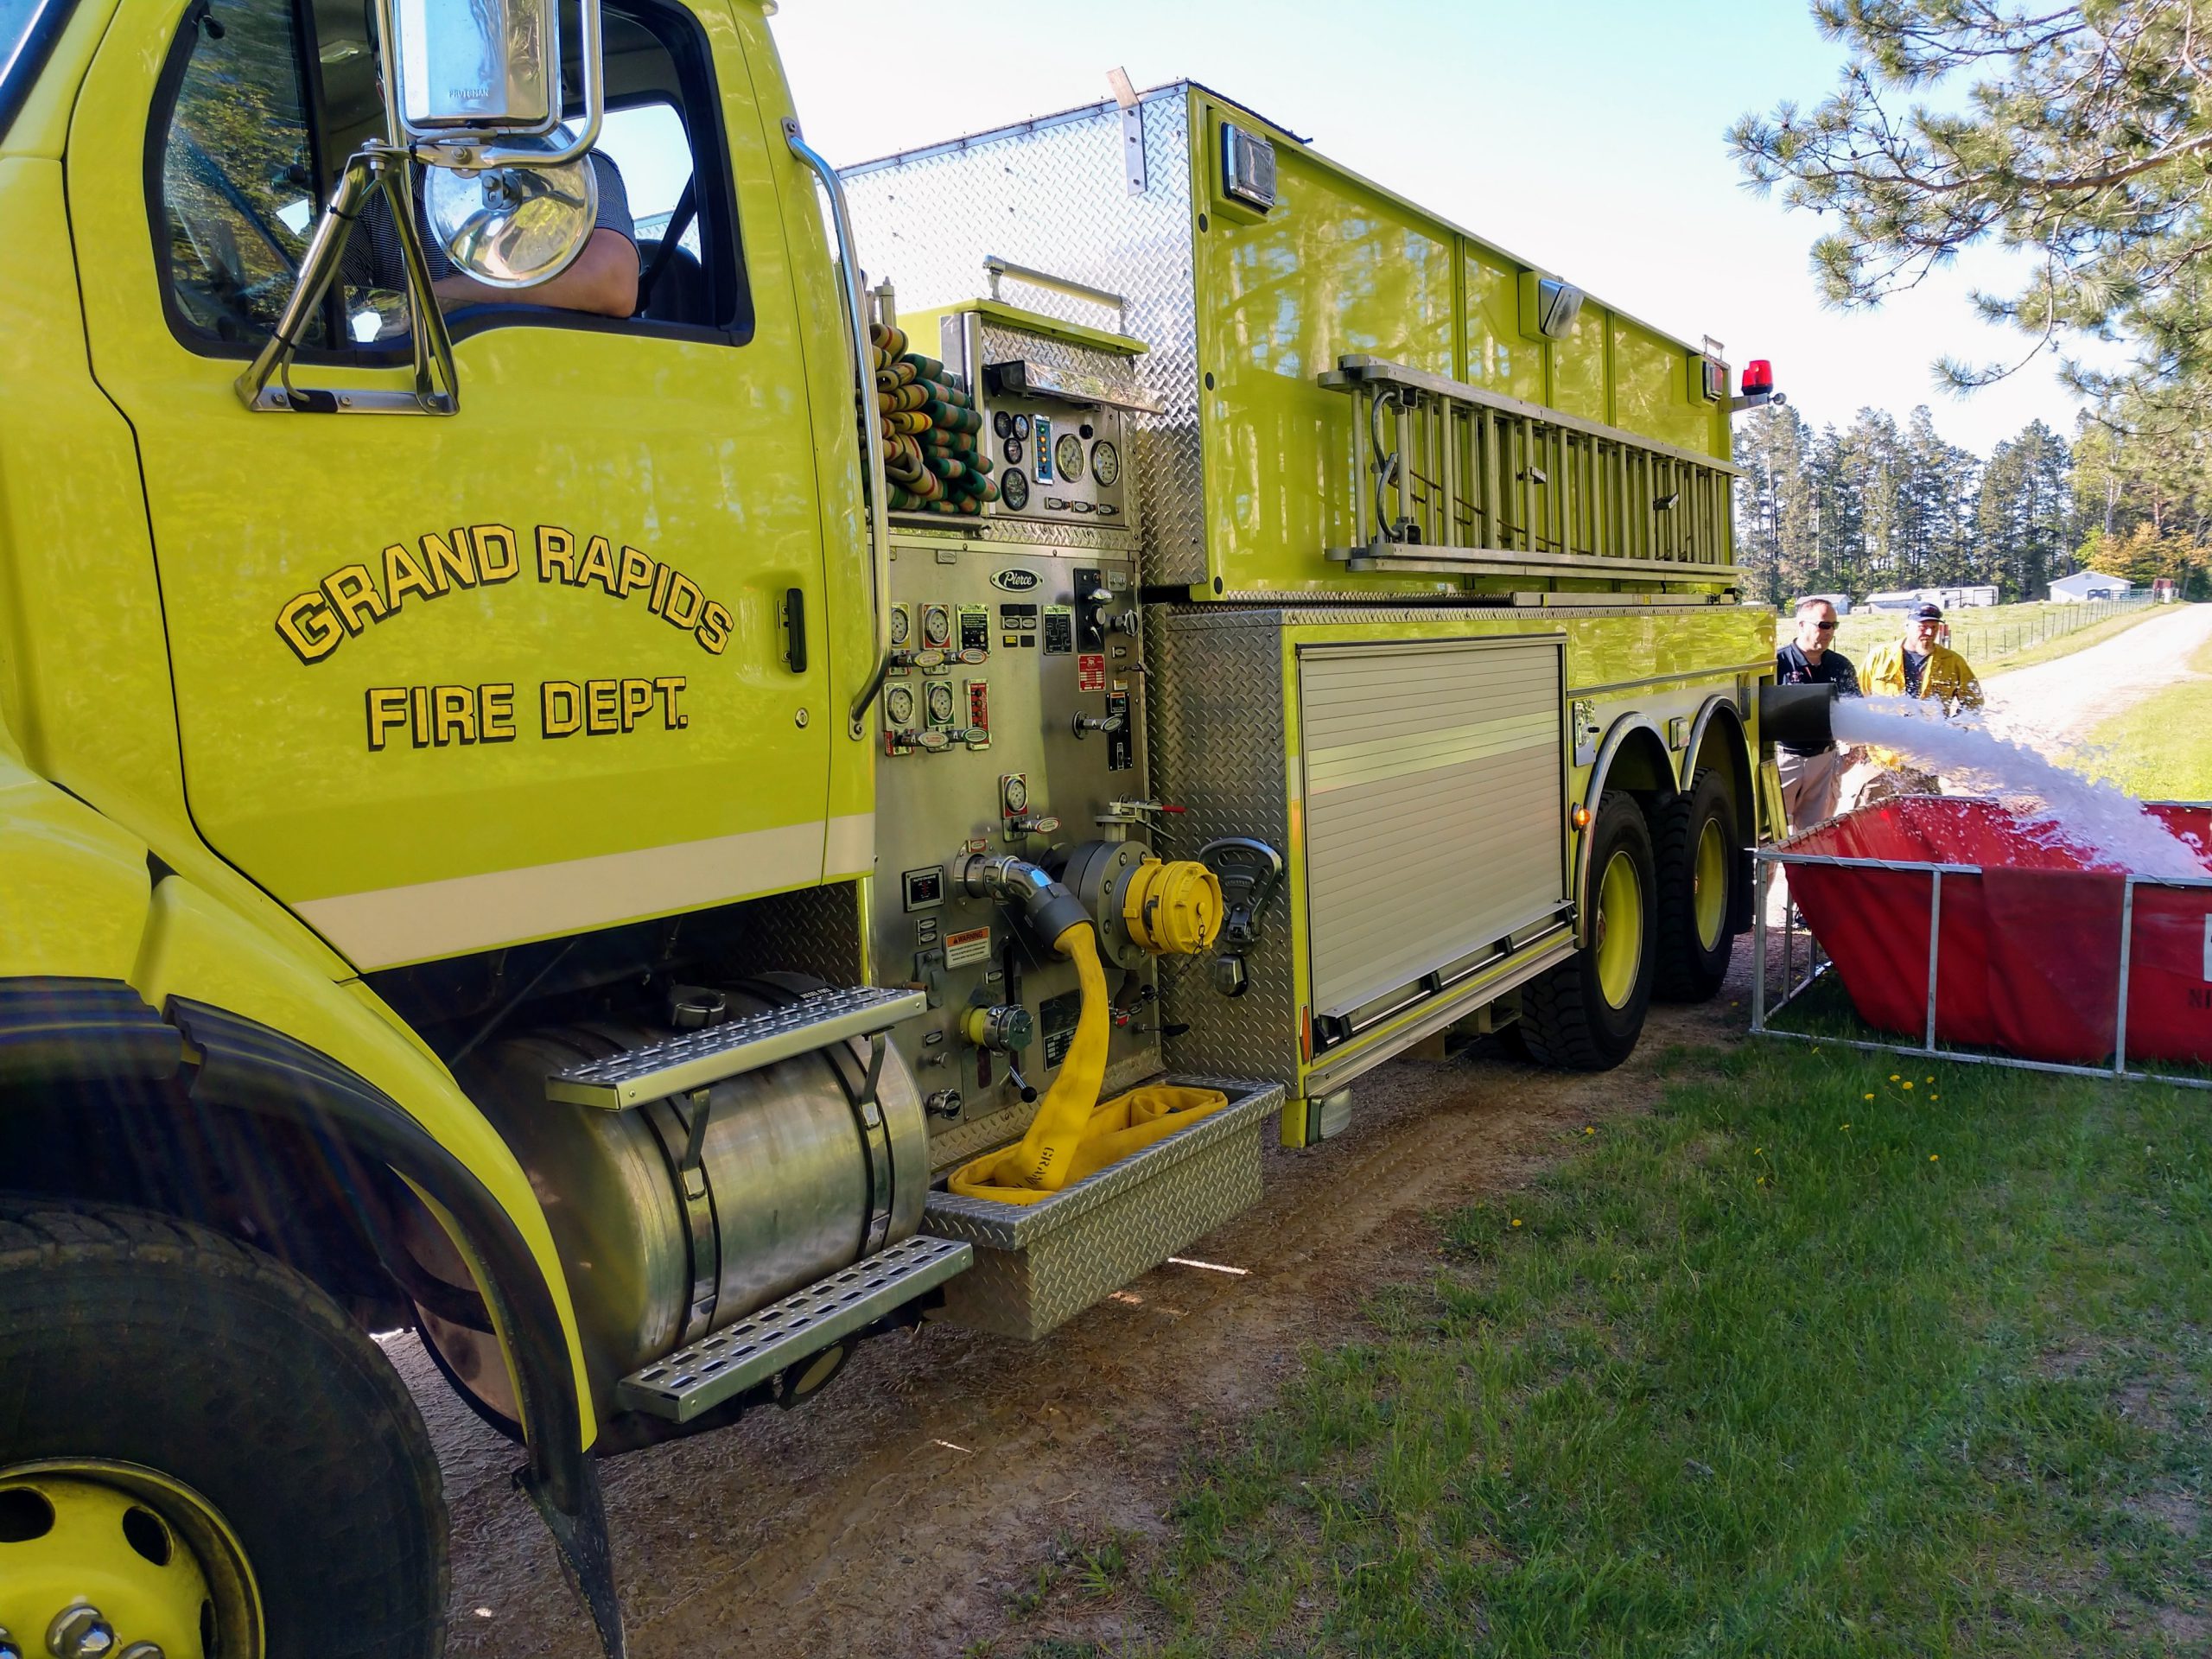 Yellow fire truck released water into a read portable tank.